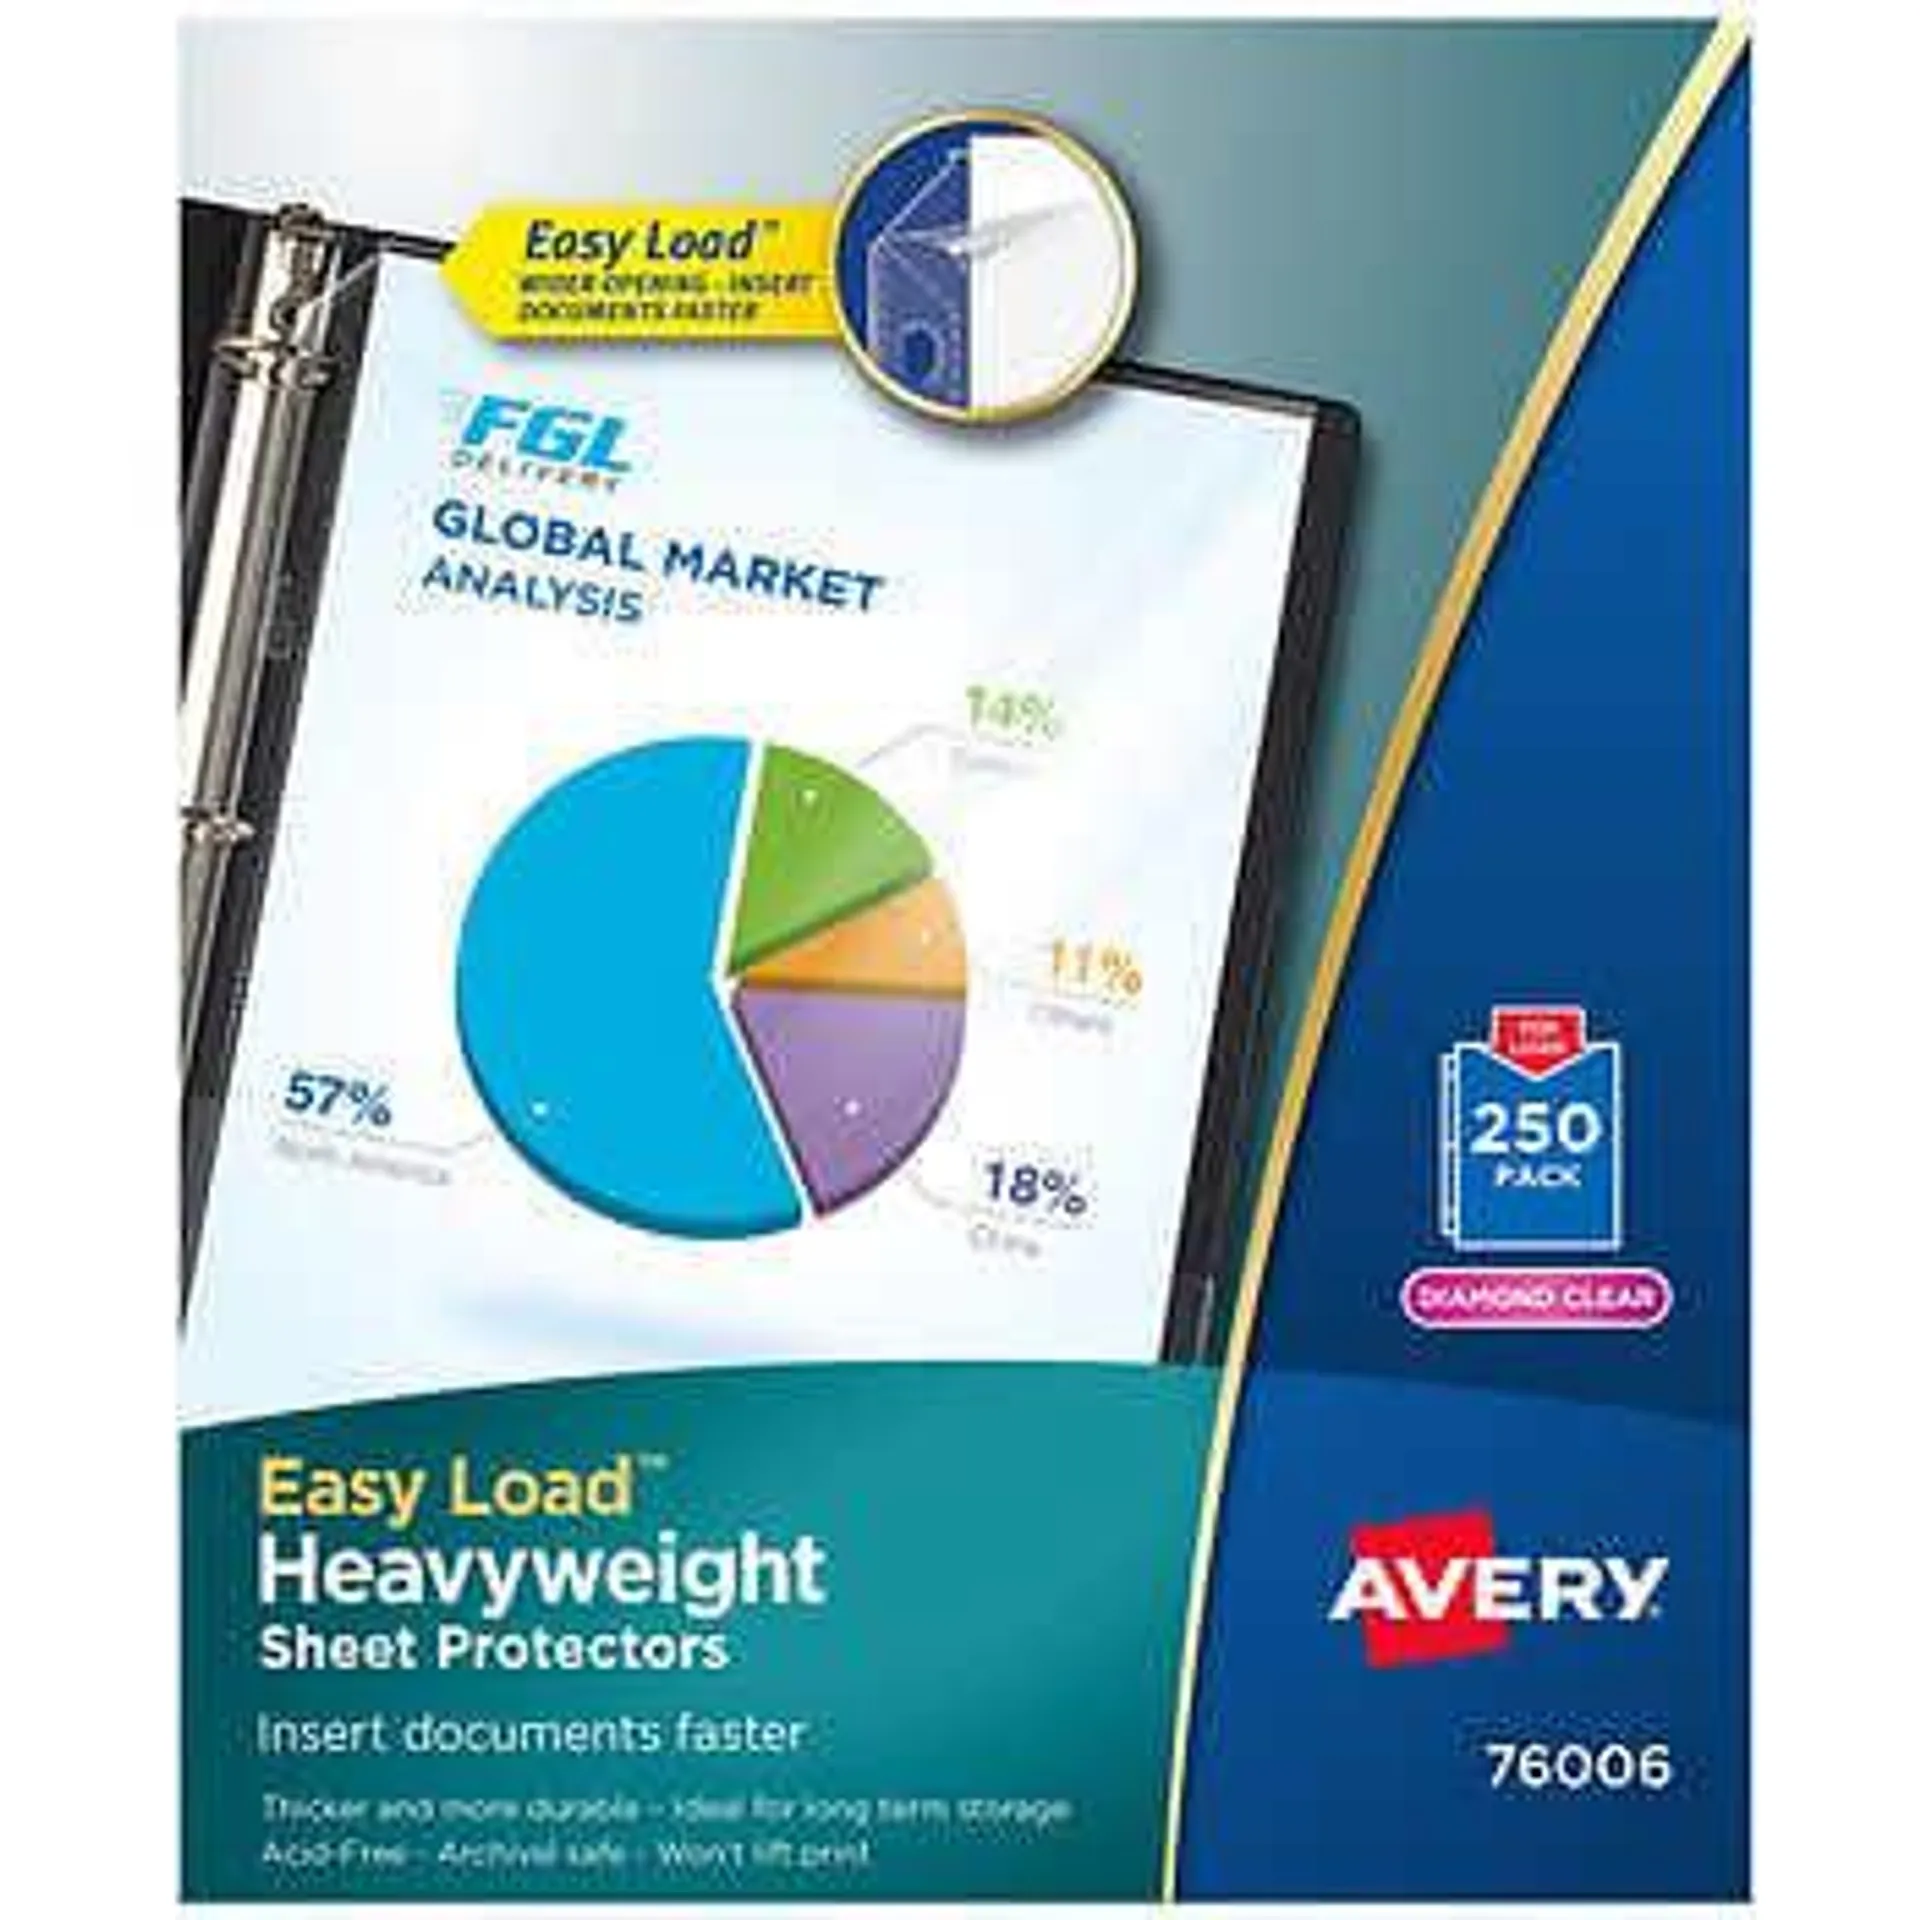 Avery Heavyweight Sheet Protector, 250-count